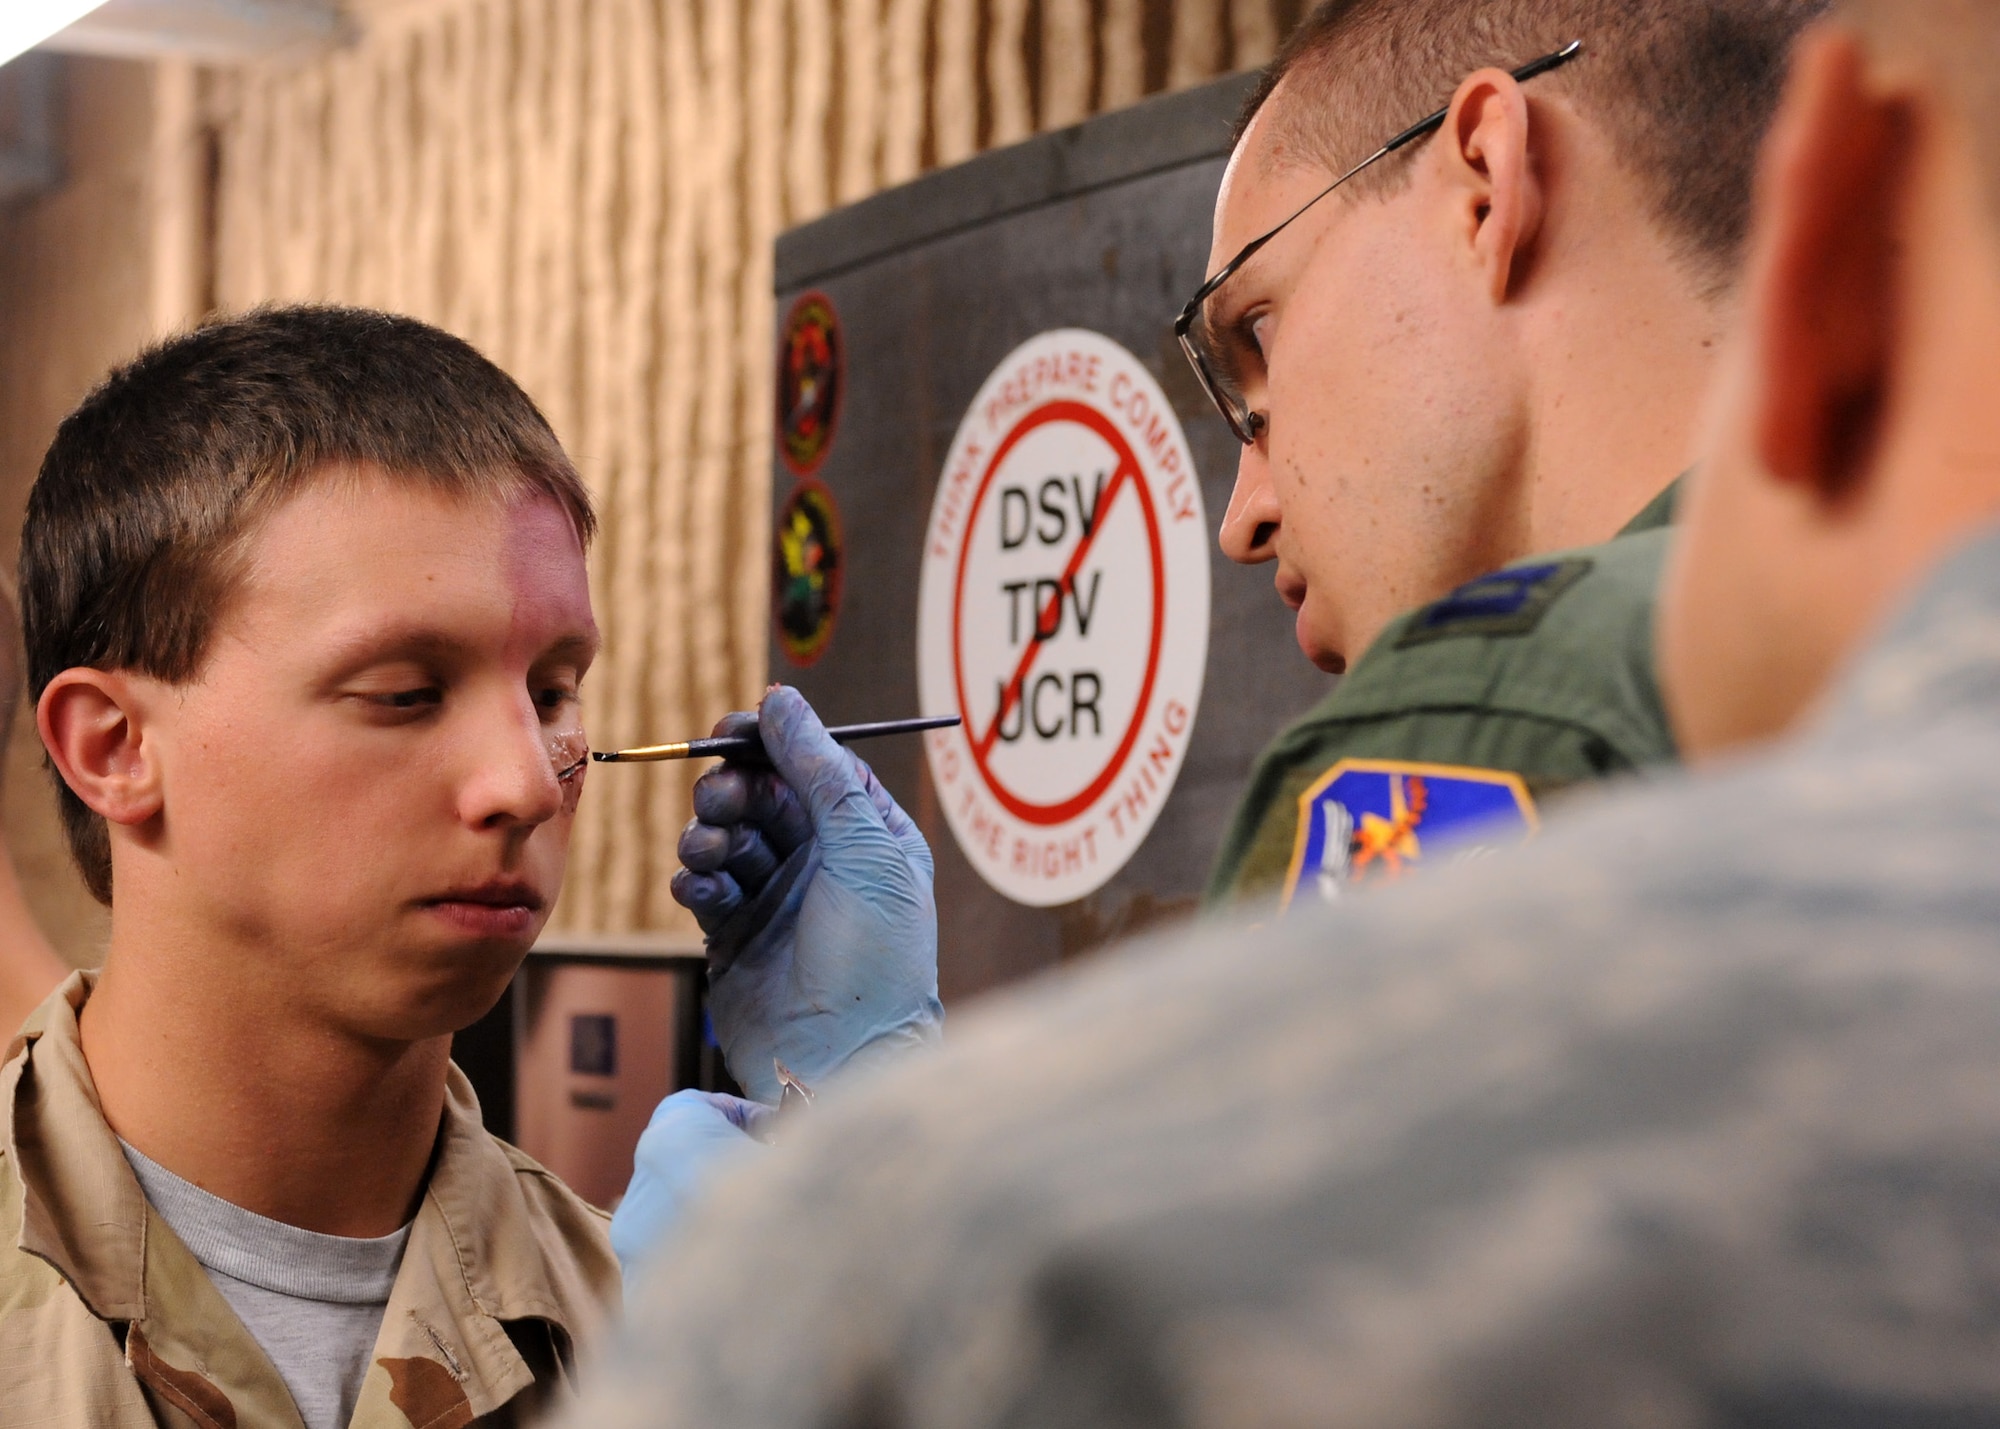 DAVIS-MONTHAN AIR FORCE BASE, Ariz. – Capt. Erik DeSoucy, 563rd Operations Support Squadron flight physician, paints fake blood on the simulated wound of a volunteer at his moulage station during the Angel Thunder exercise here Oct. 11. Approximately 1,400 U.S. Military, federal and state employees, and coalition forces are participating in the fifth-annual Angel Thunder exercise, the largest military combat search and rescue exercise in the world. (U.S. Air Force photo/Airman 1st Class Timothy D. Moore)